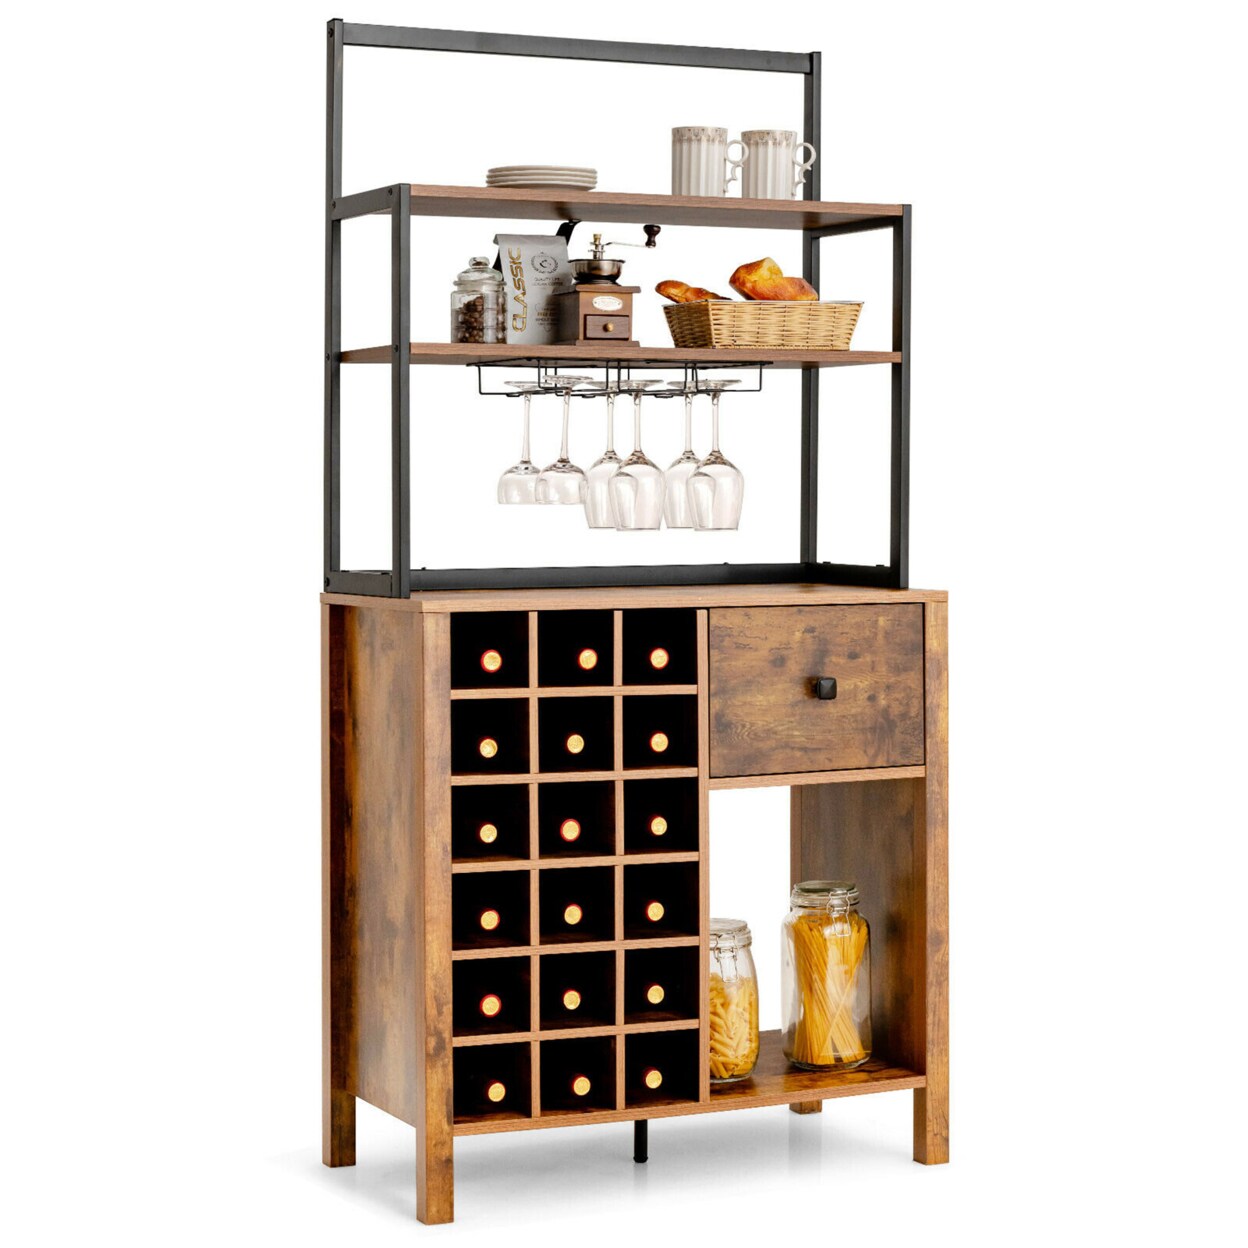 Gymax Kitchen Bakers Rack Freestanding Wine Rack Table w/ Glass Holder and Drawer Black / Rustic